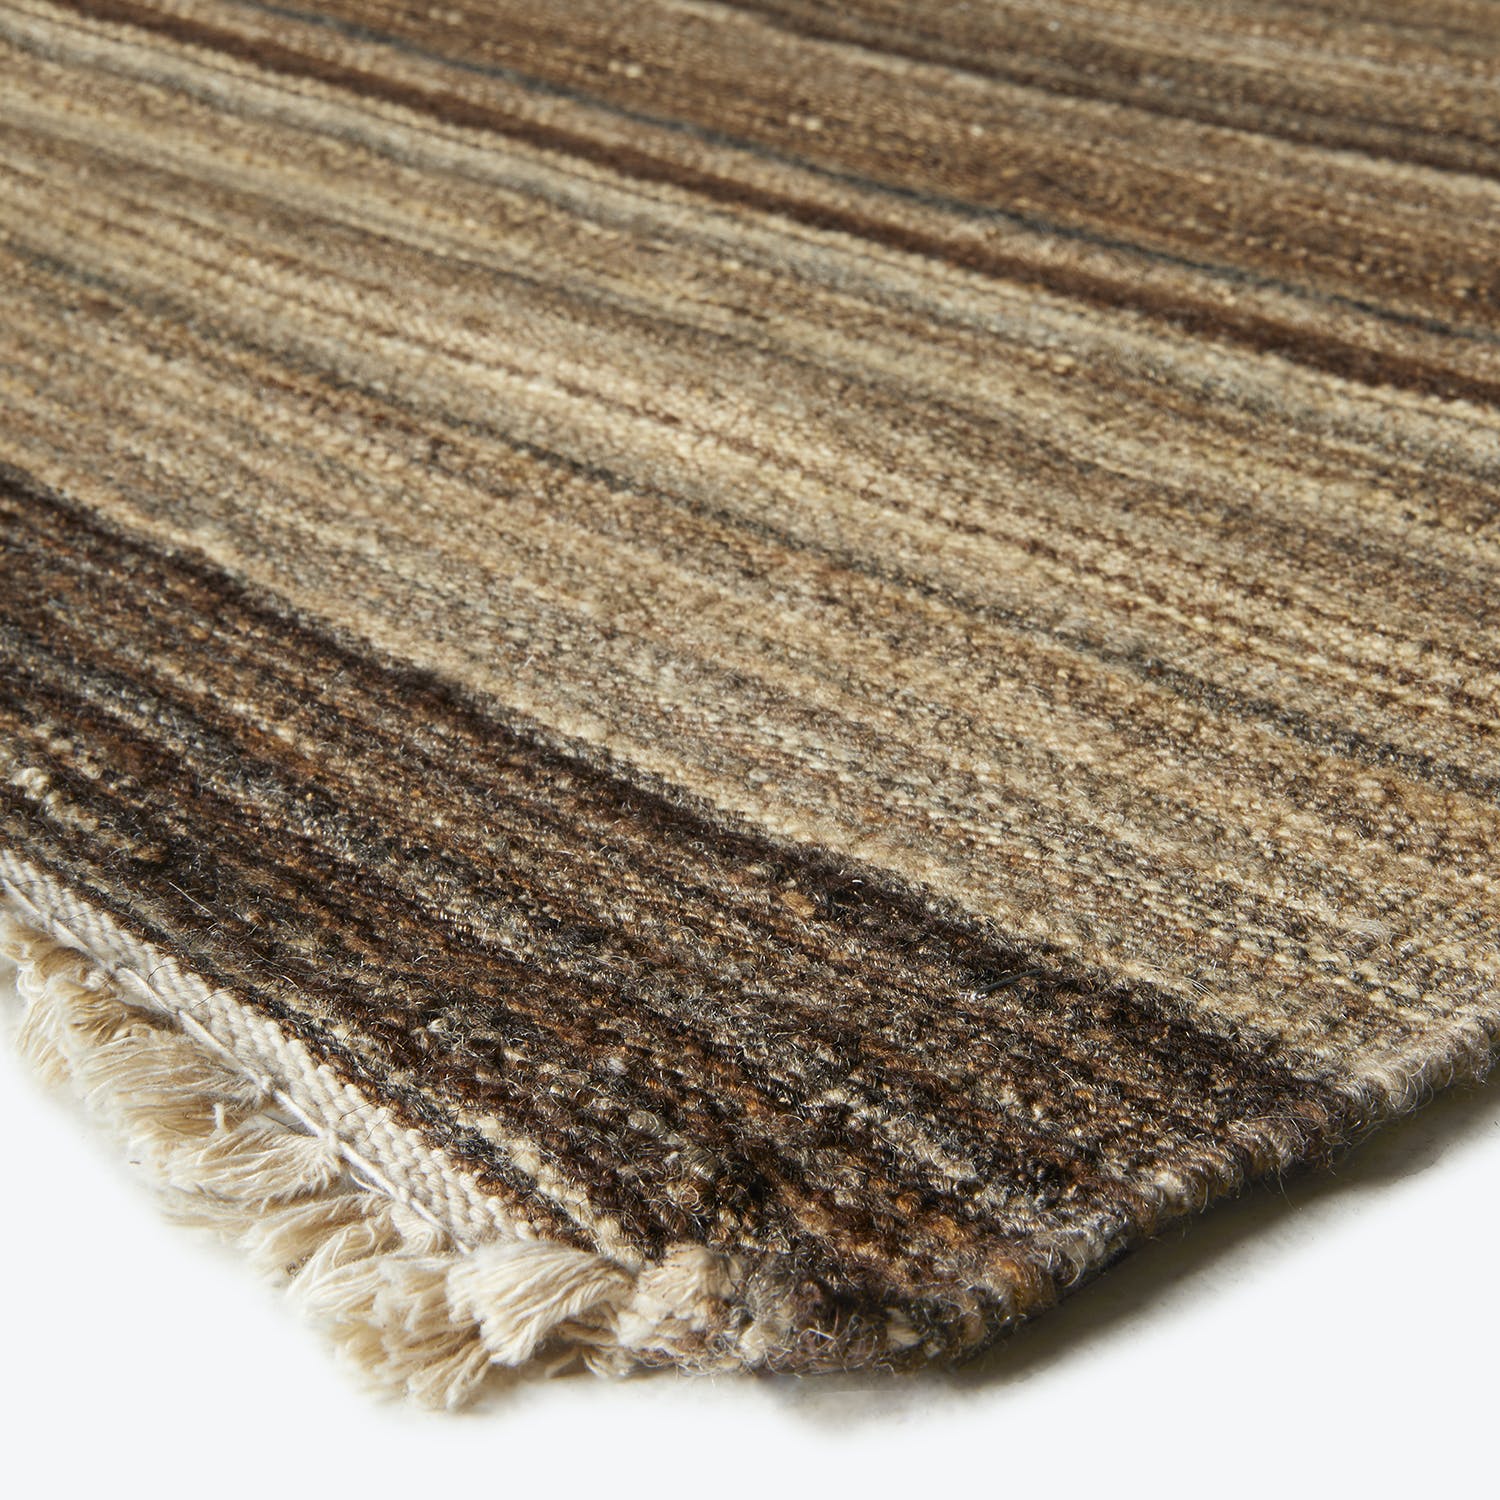 Close-up of a textured fabric with horizontal stripes and earthy tones.